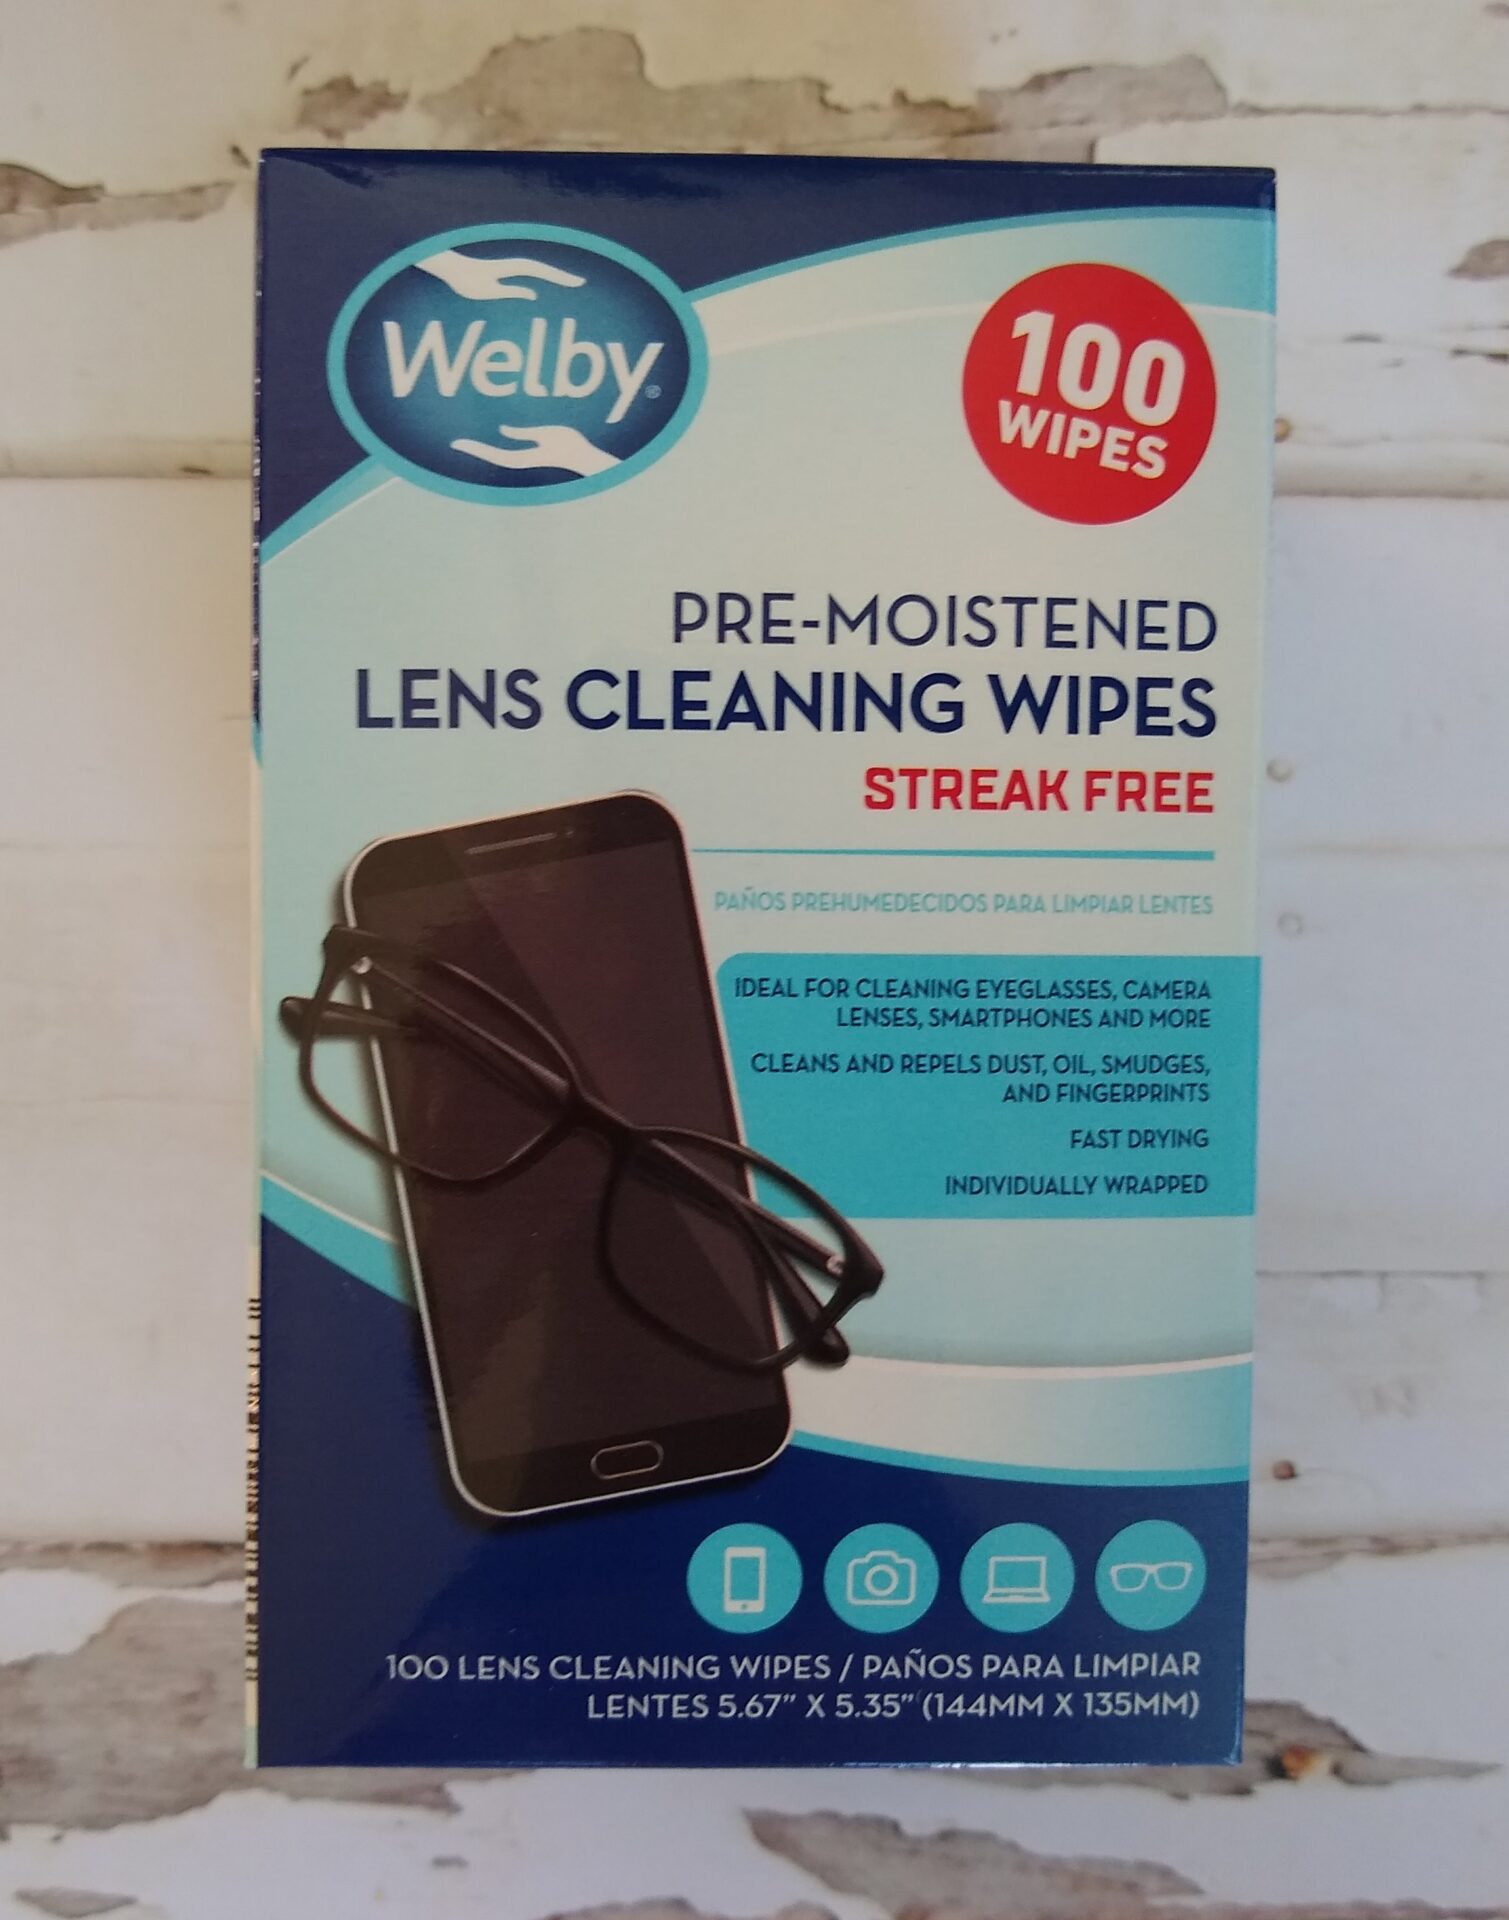 Lens cleaning wipes in Lidl - Pentax User